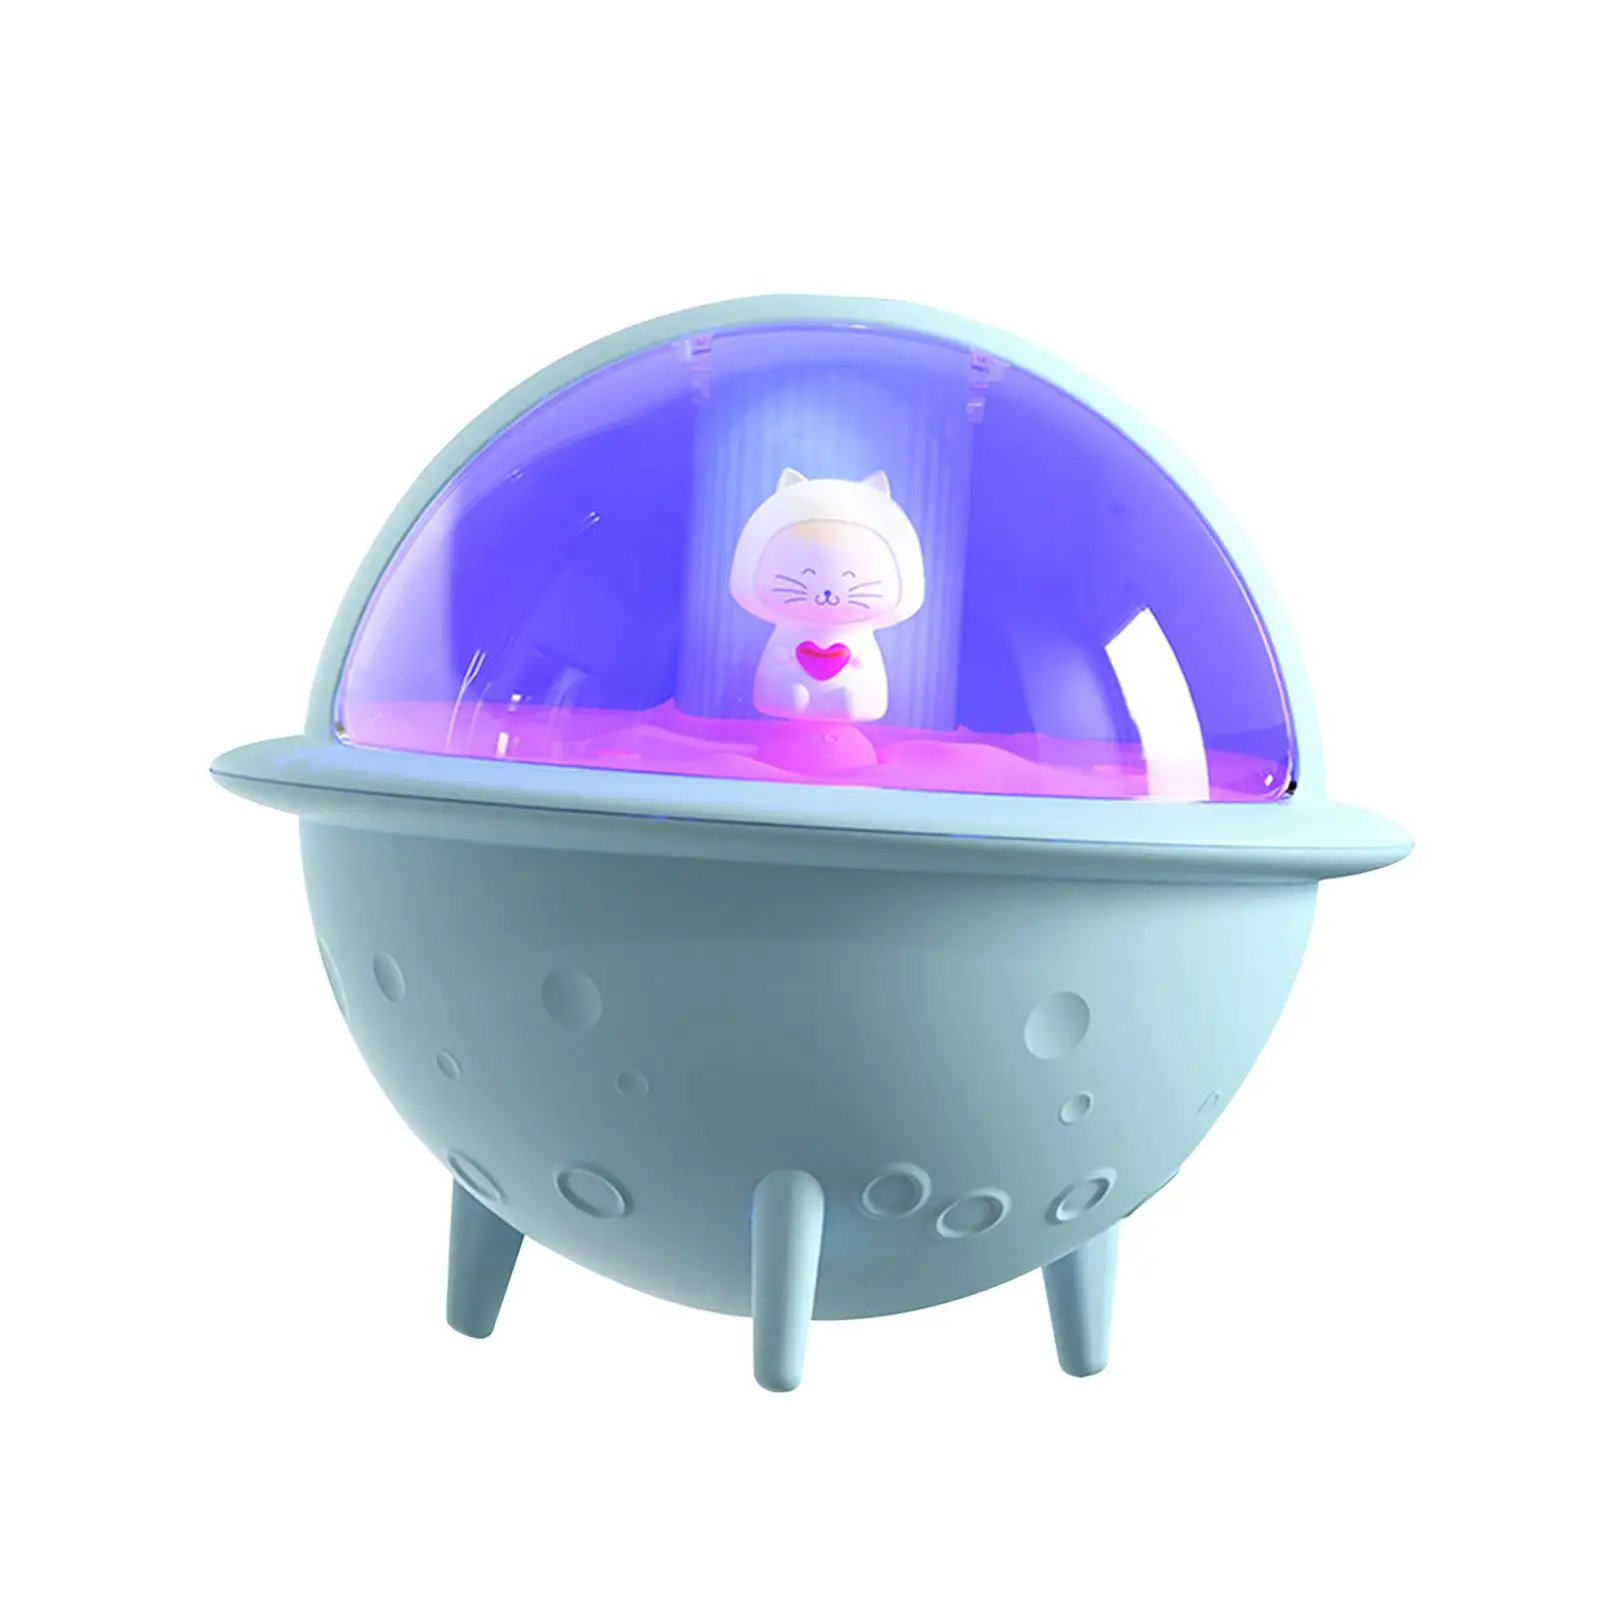 Astronaut Humidifier Rechargable Air Humidifier for Bedroom Home Living Room